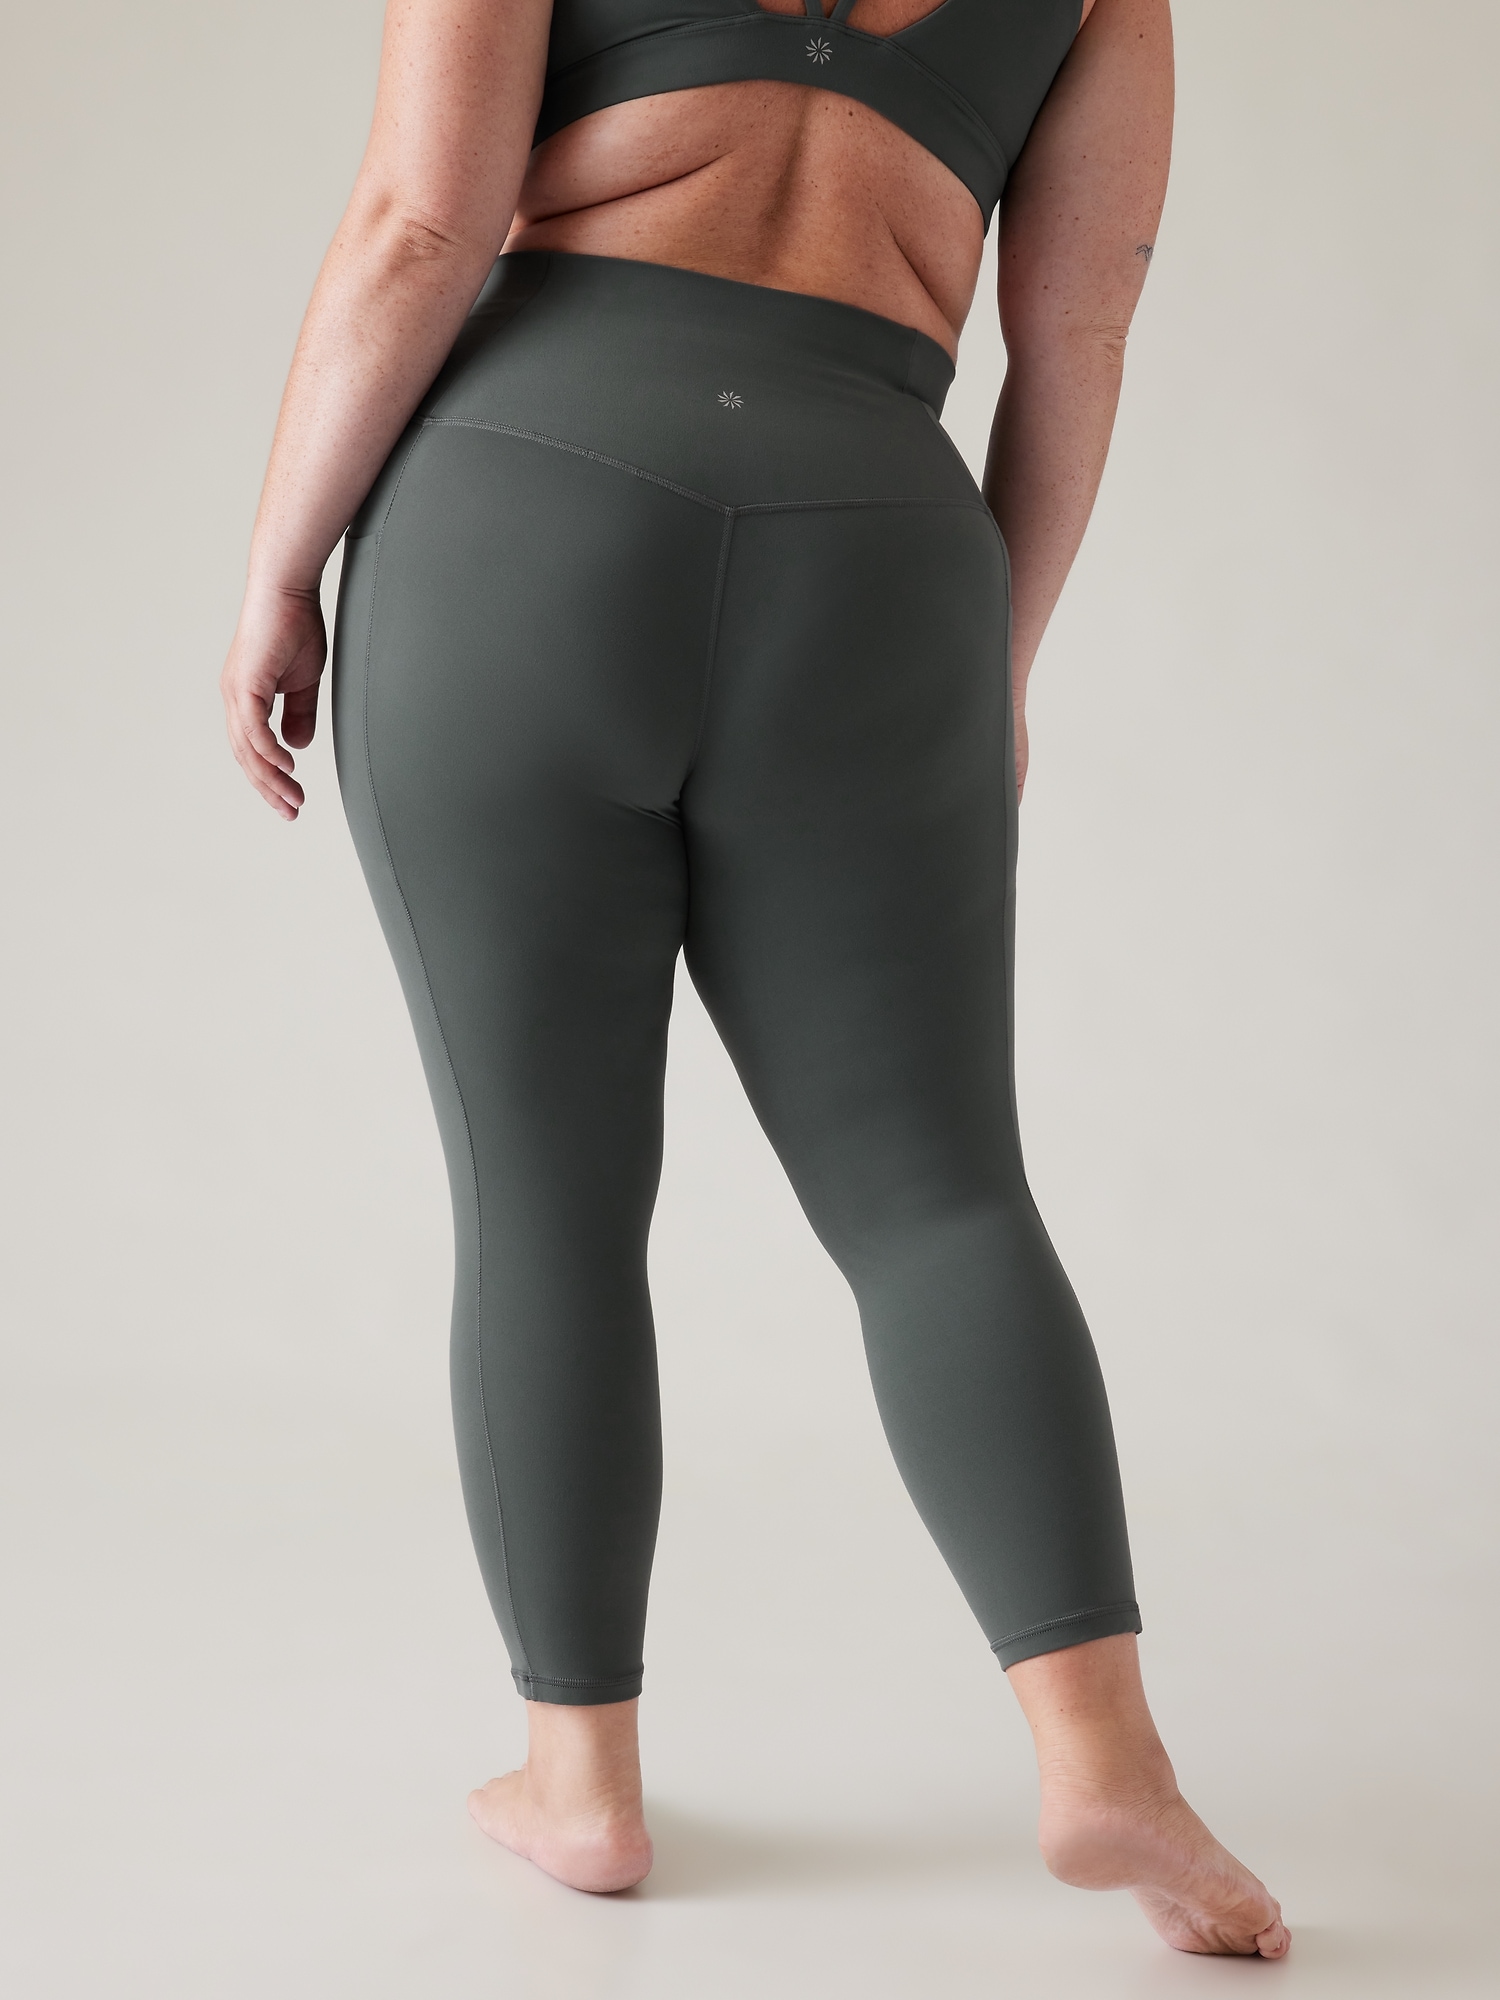 Review: Women's On Active 7/8 Tights